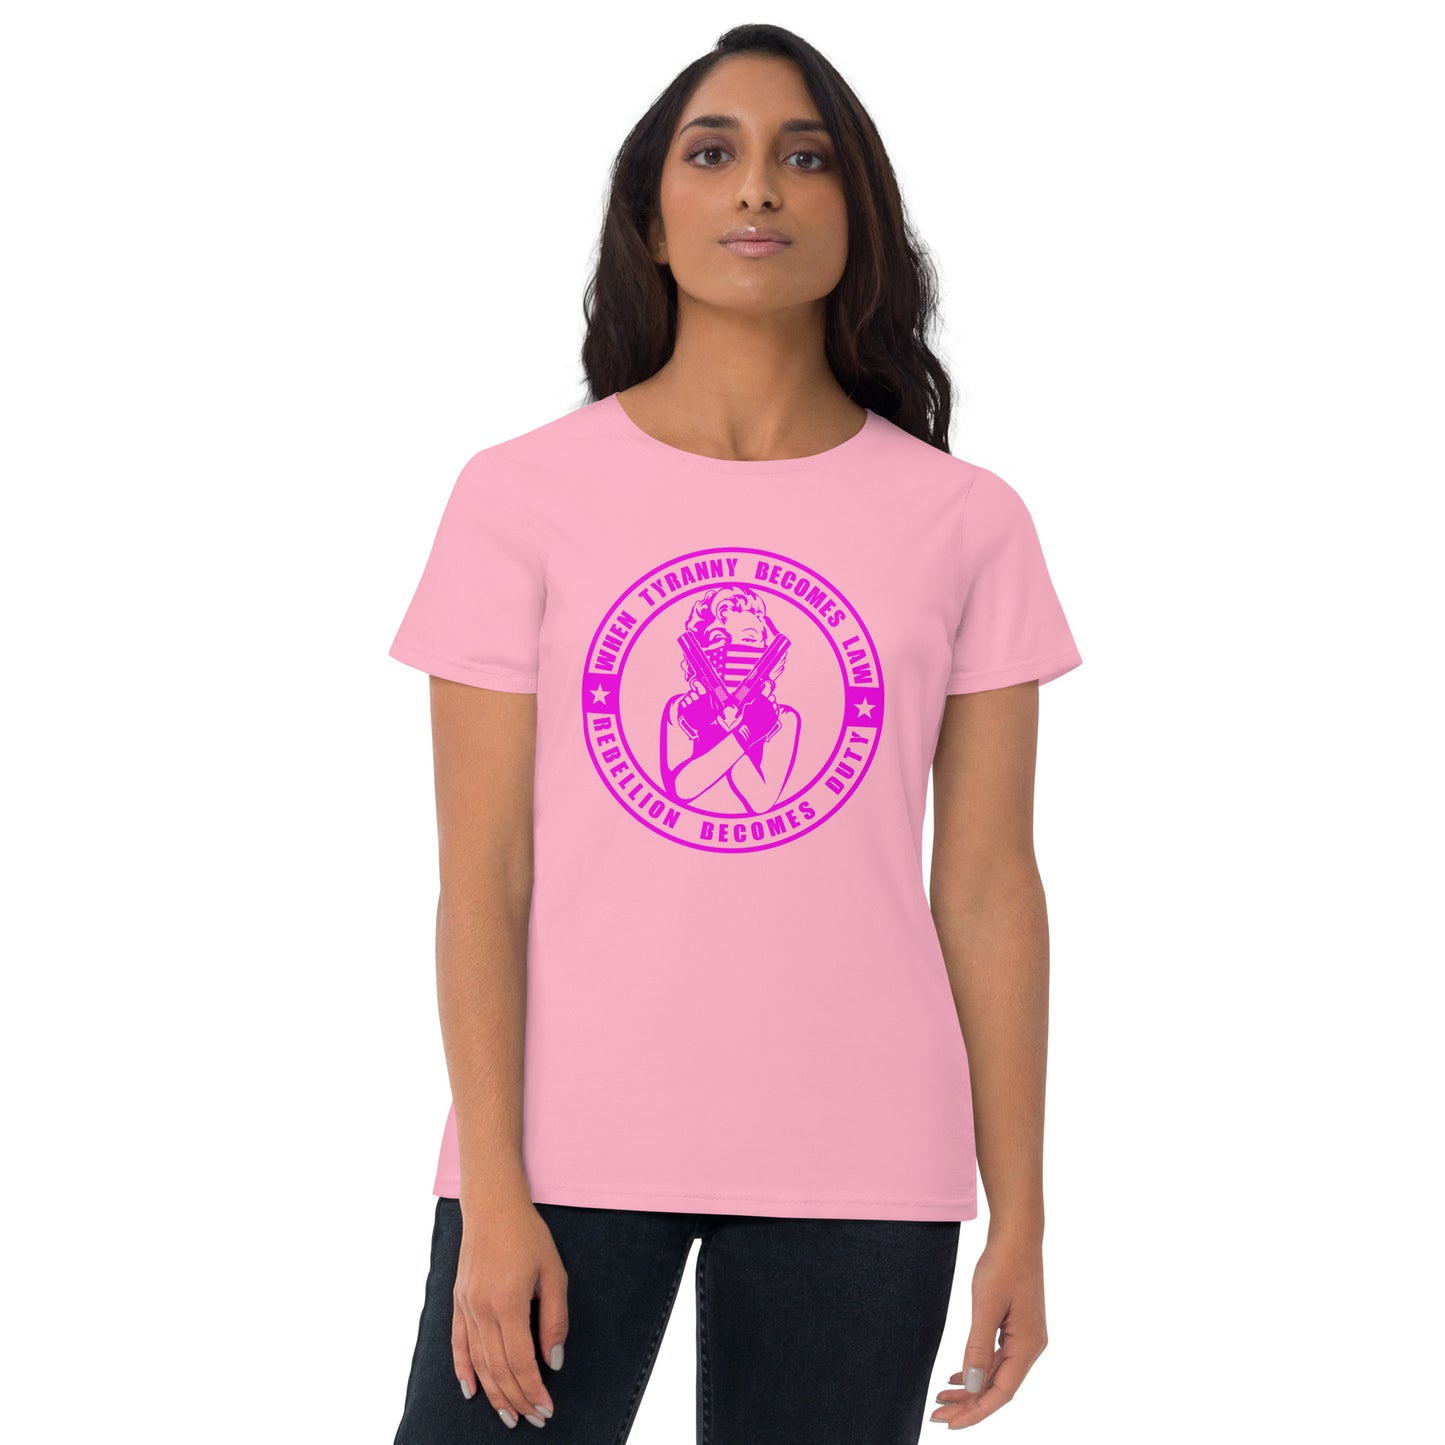 When Tyranny Becomes Law Rebellion Becomes Duty | Women's short sleeve T-Shirt